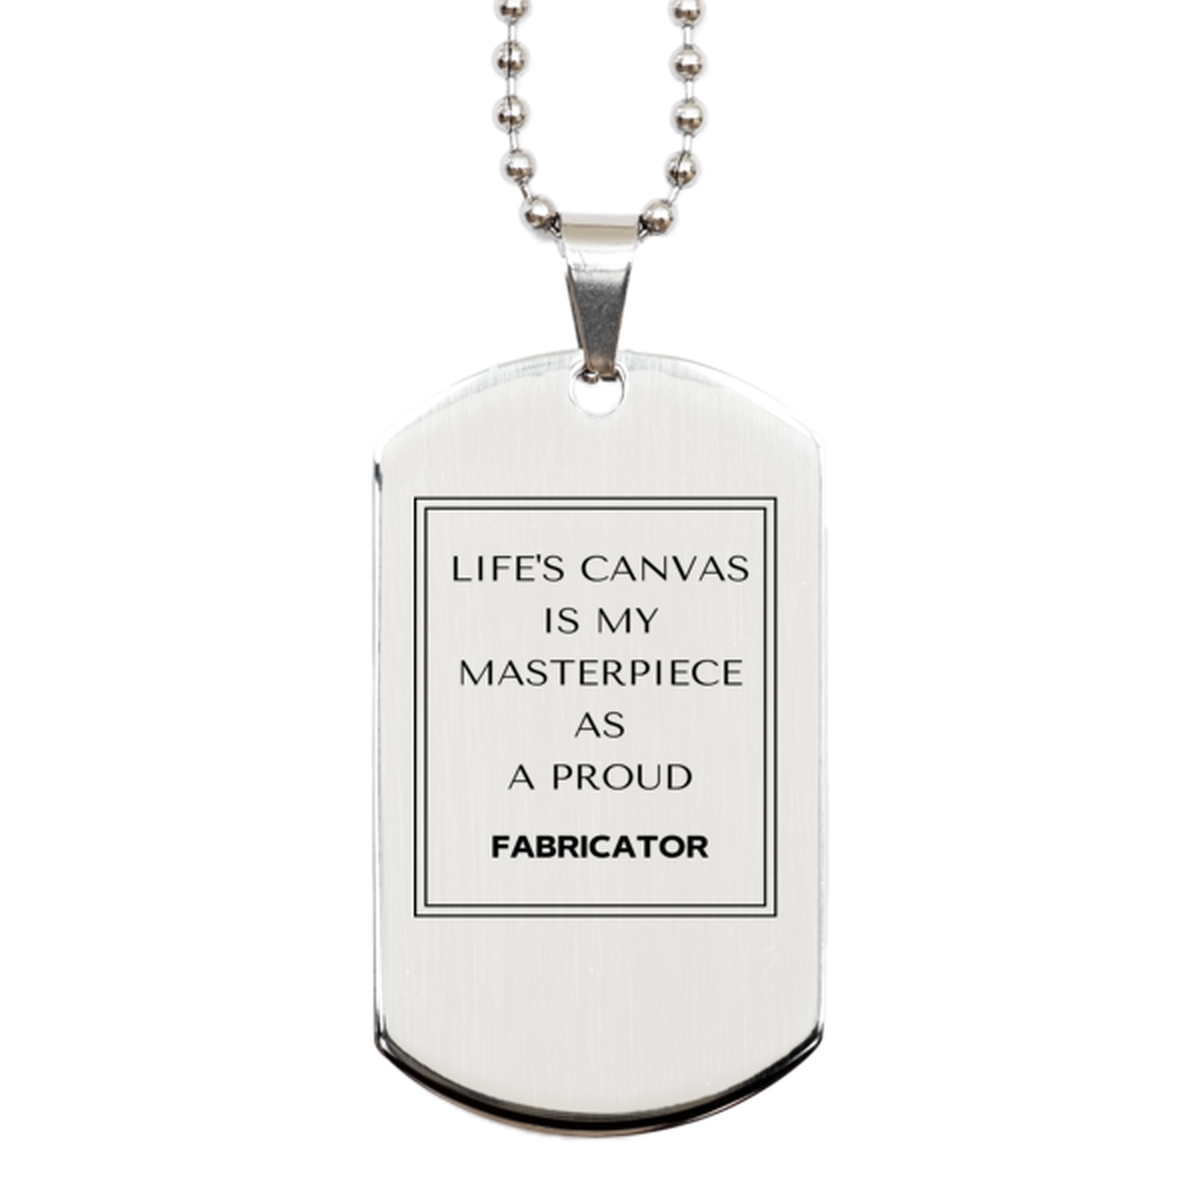 Proud Fabricator Gifts, Life's canvas is my masterpiece, Epic Birthday Christmas Unique Silver Dog Tag For Fabricator, Coworkers, Men, Women, Friends